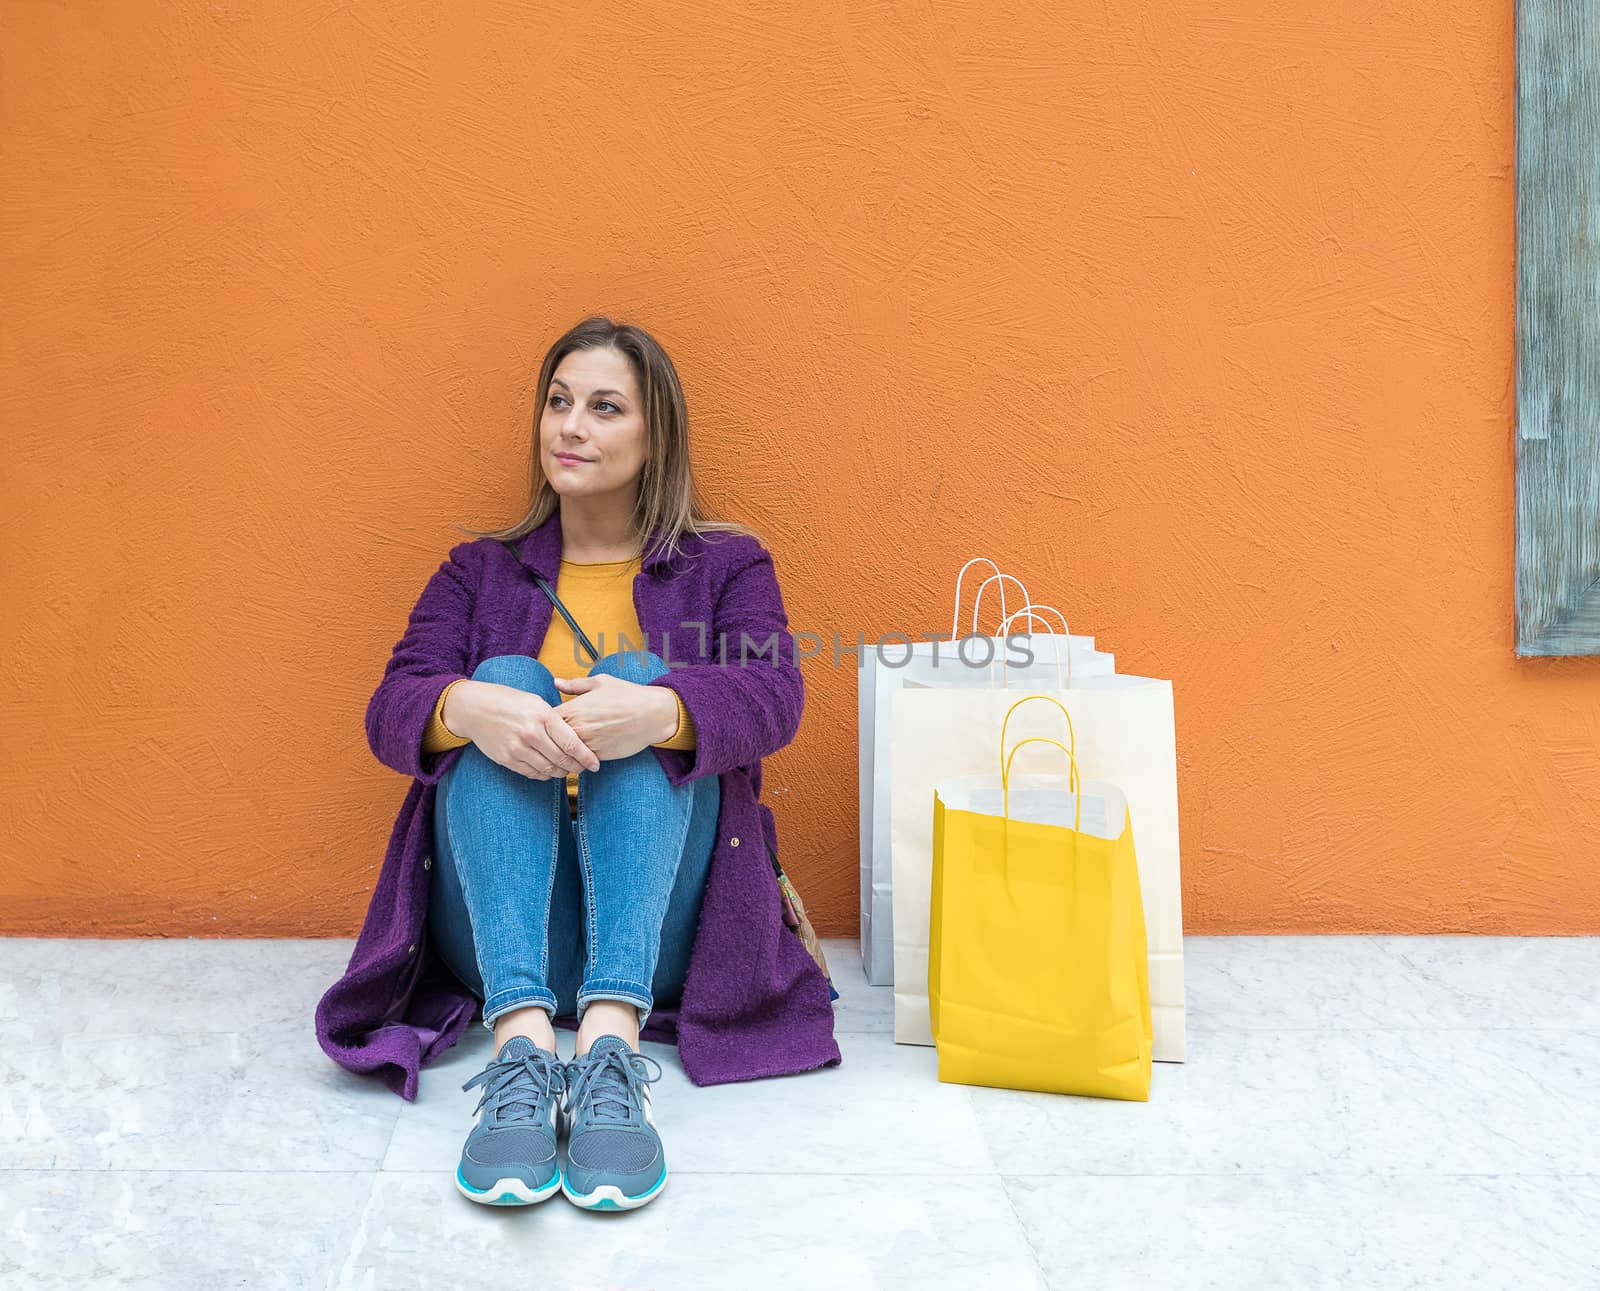 Smiling middle-aged blonde woman sitting on the floor with shopping bags on a orange background